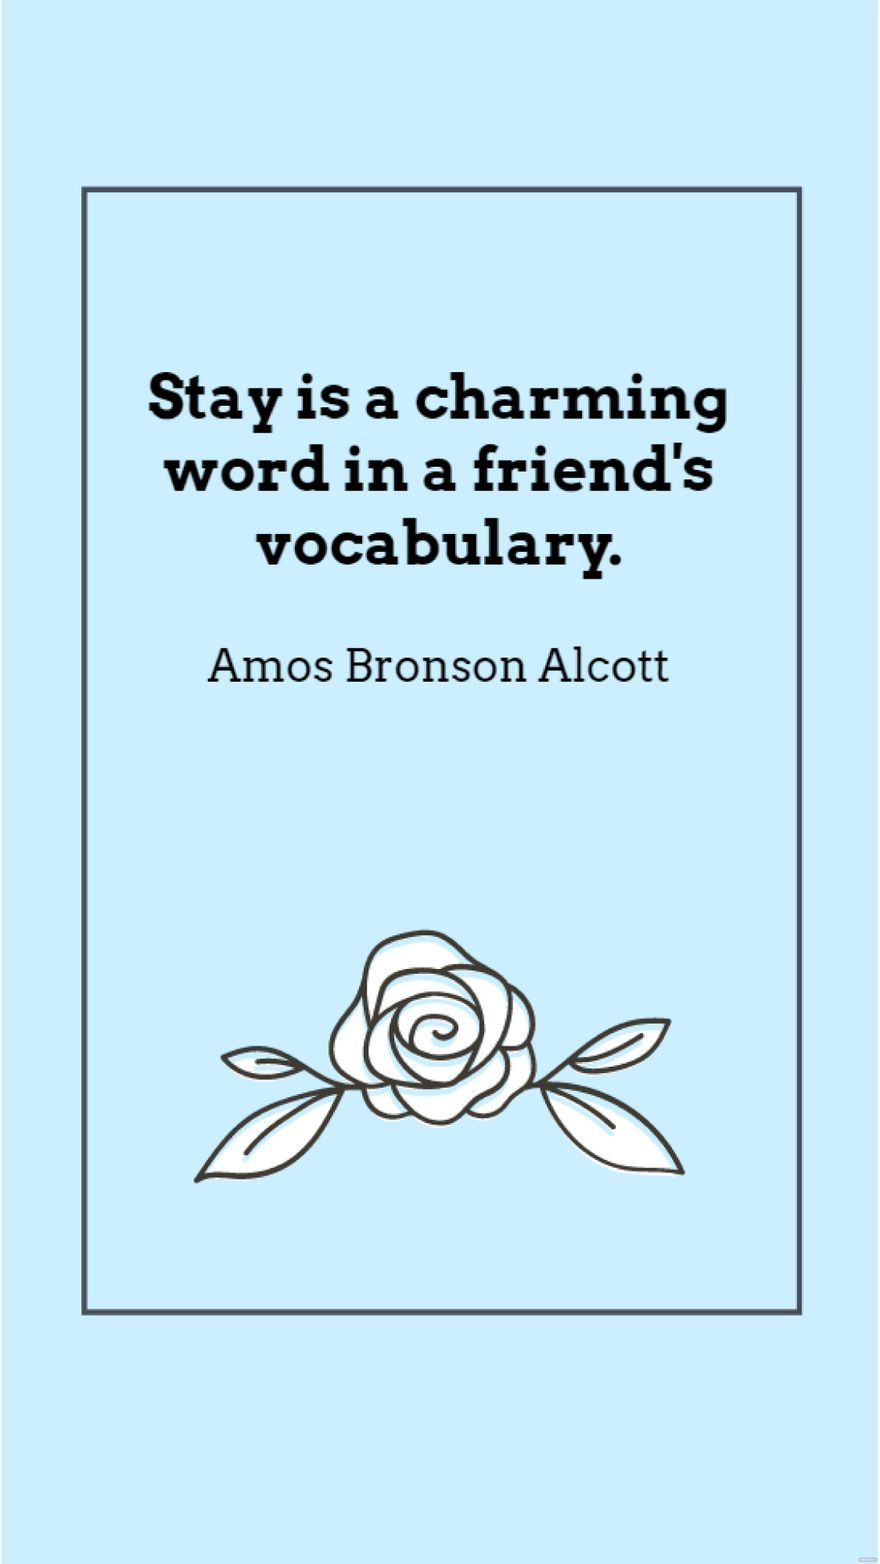 Amos Bronson Alcott - Stay is a charming word in a friend's vocabulary.